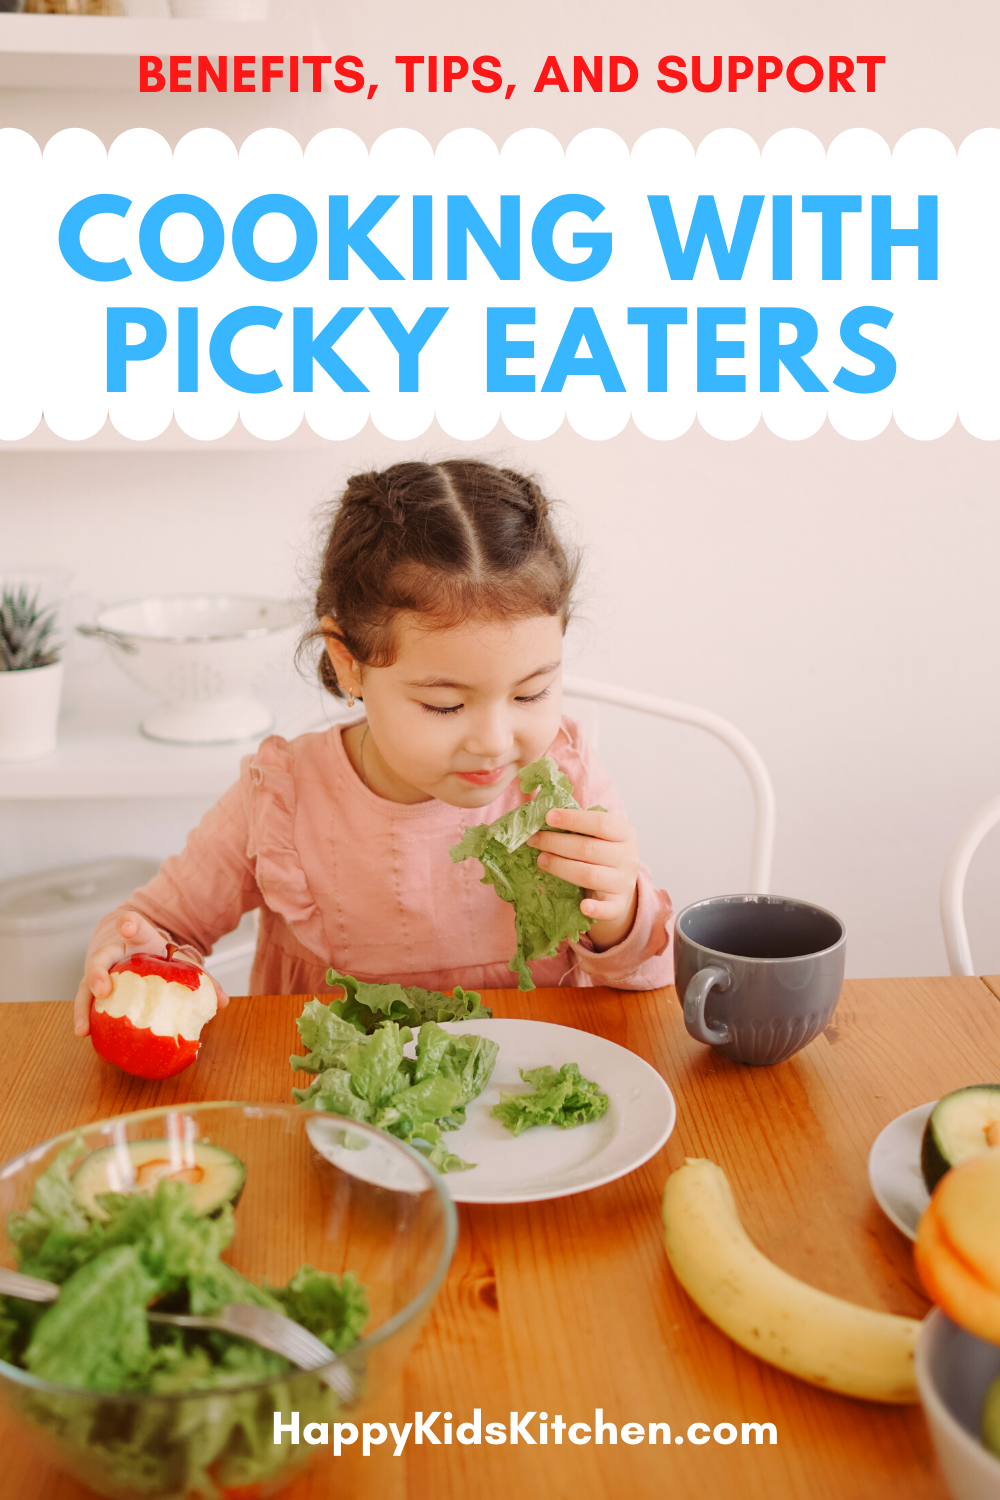 Healthy Lunch Box Ideas for Toddlers and Kids - Happy Kids Kitchen by  Heather Wish Staller